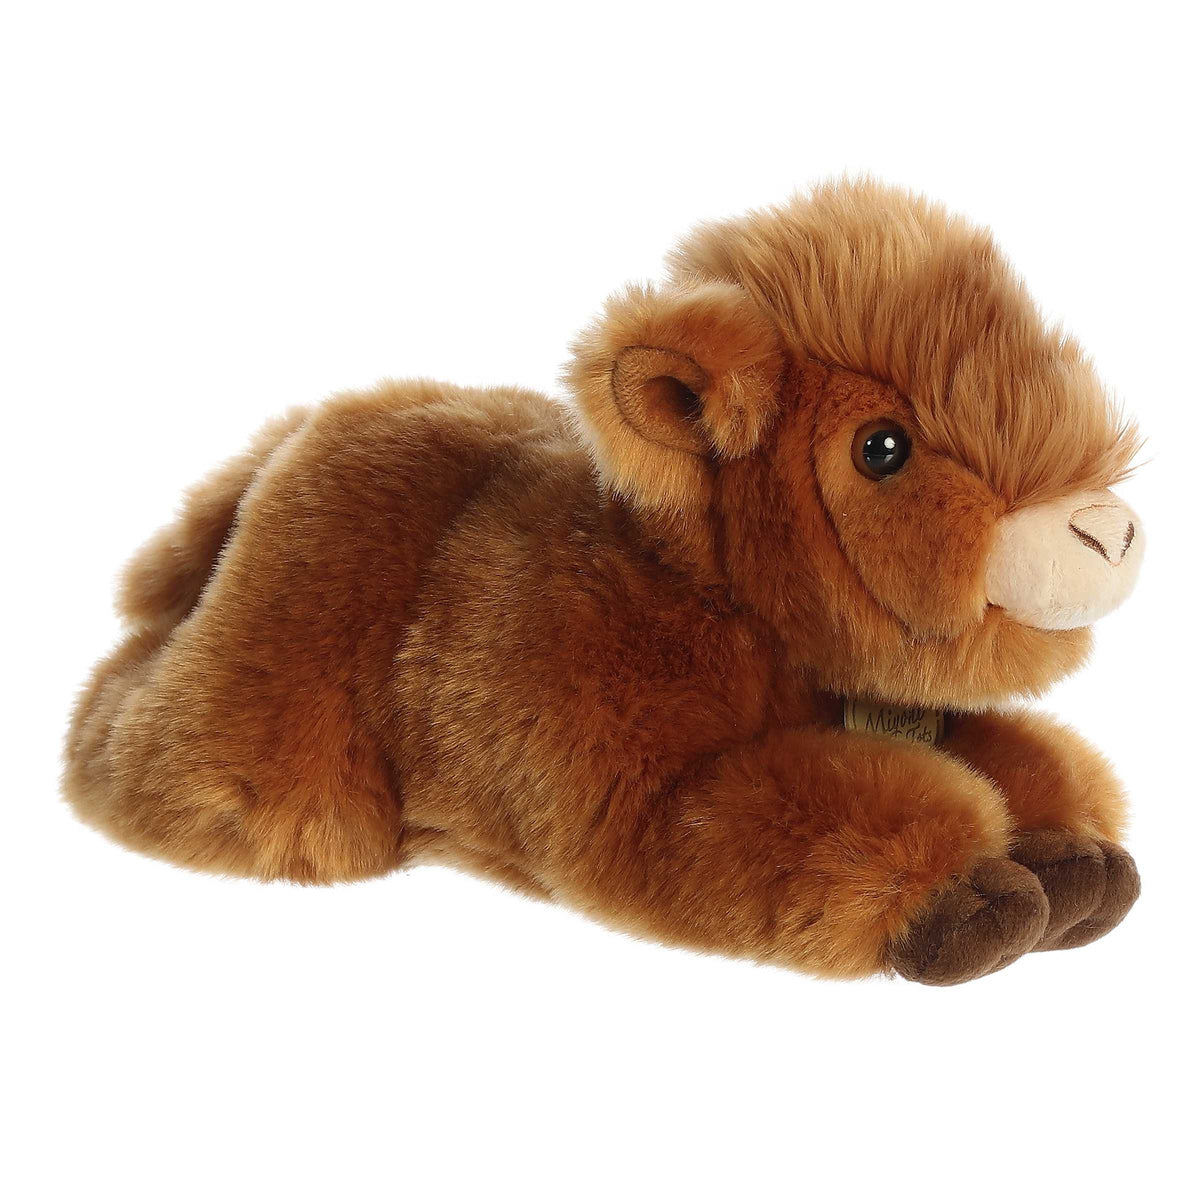 Shaggy ginger Highland Cow Calf plush with sweet little horns, crafted for lifelike charm and cuddles, by Aurora.